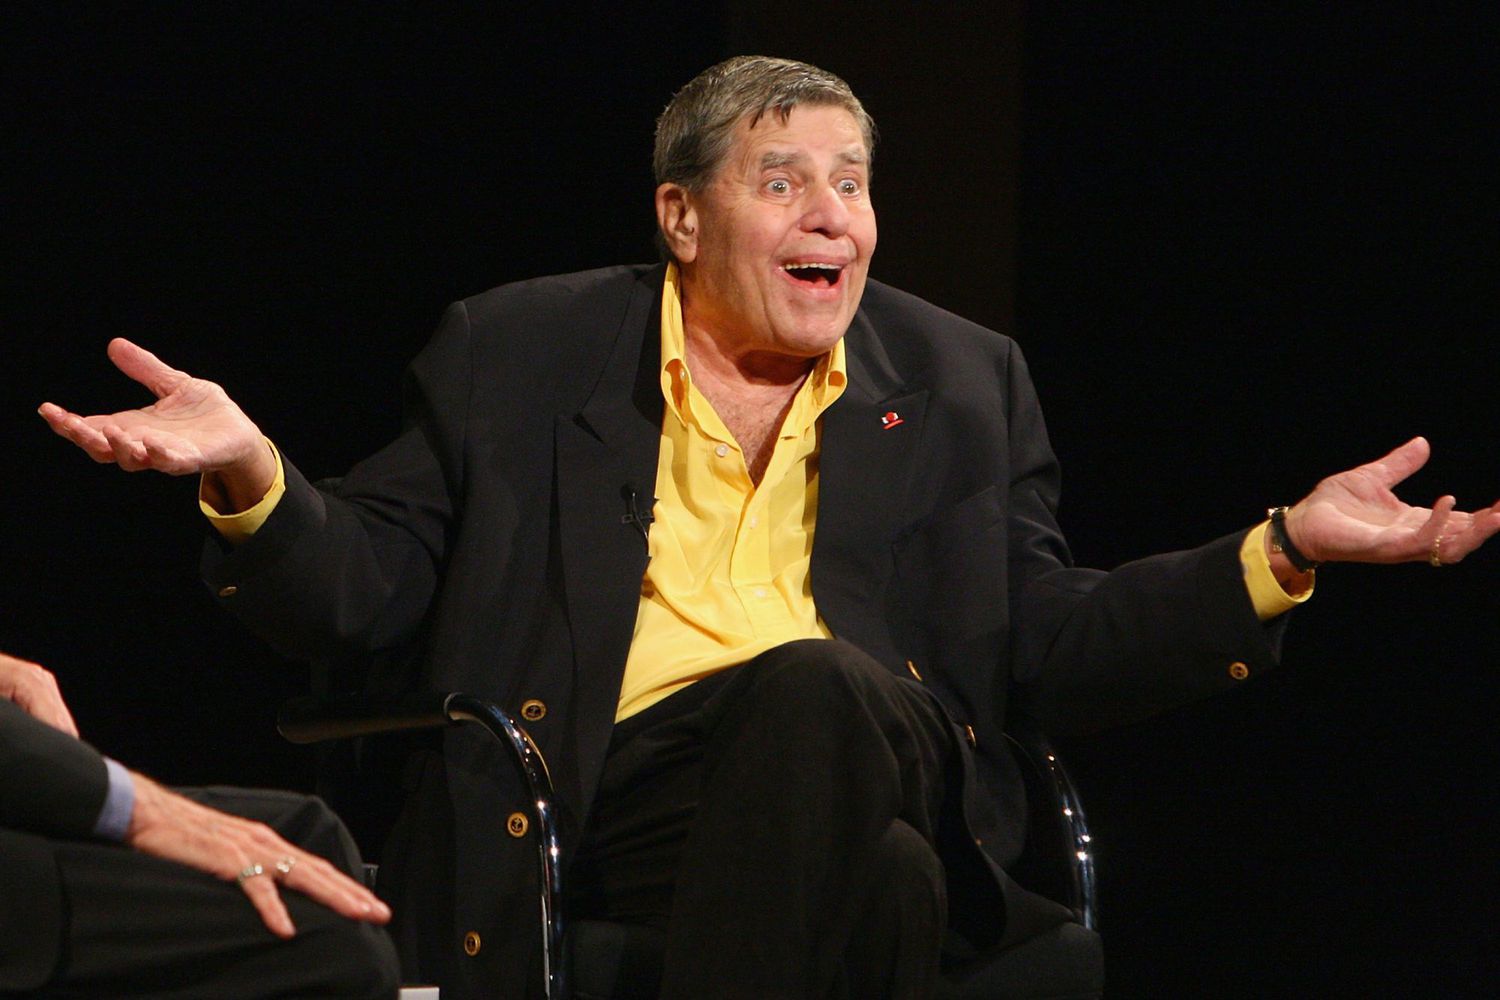 Moving Image Presents Jerry Lewis in Conversation with Peter Bogdanovich